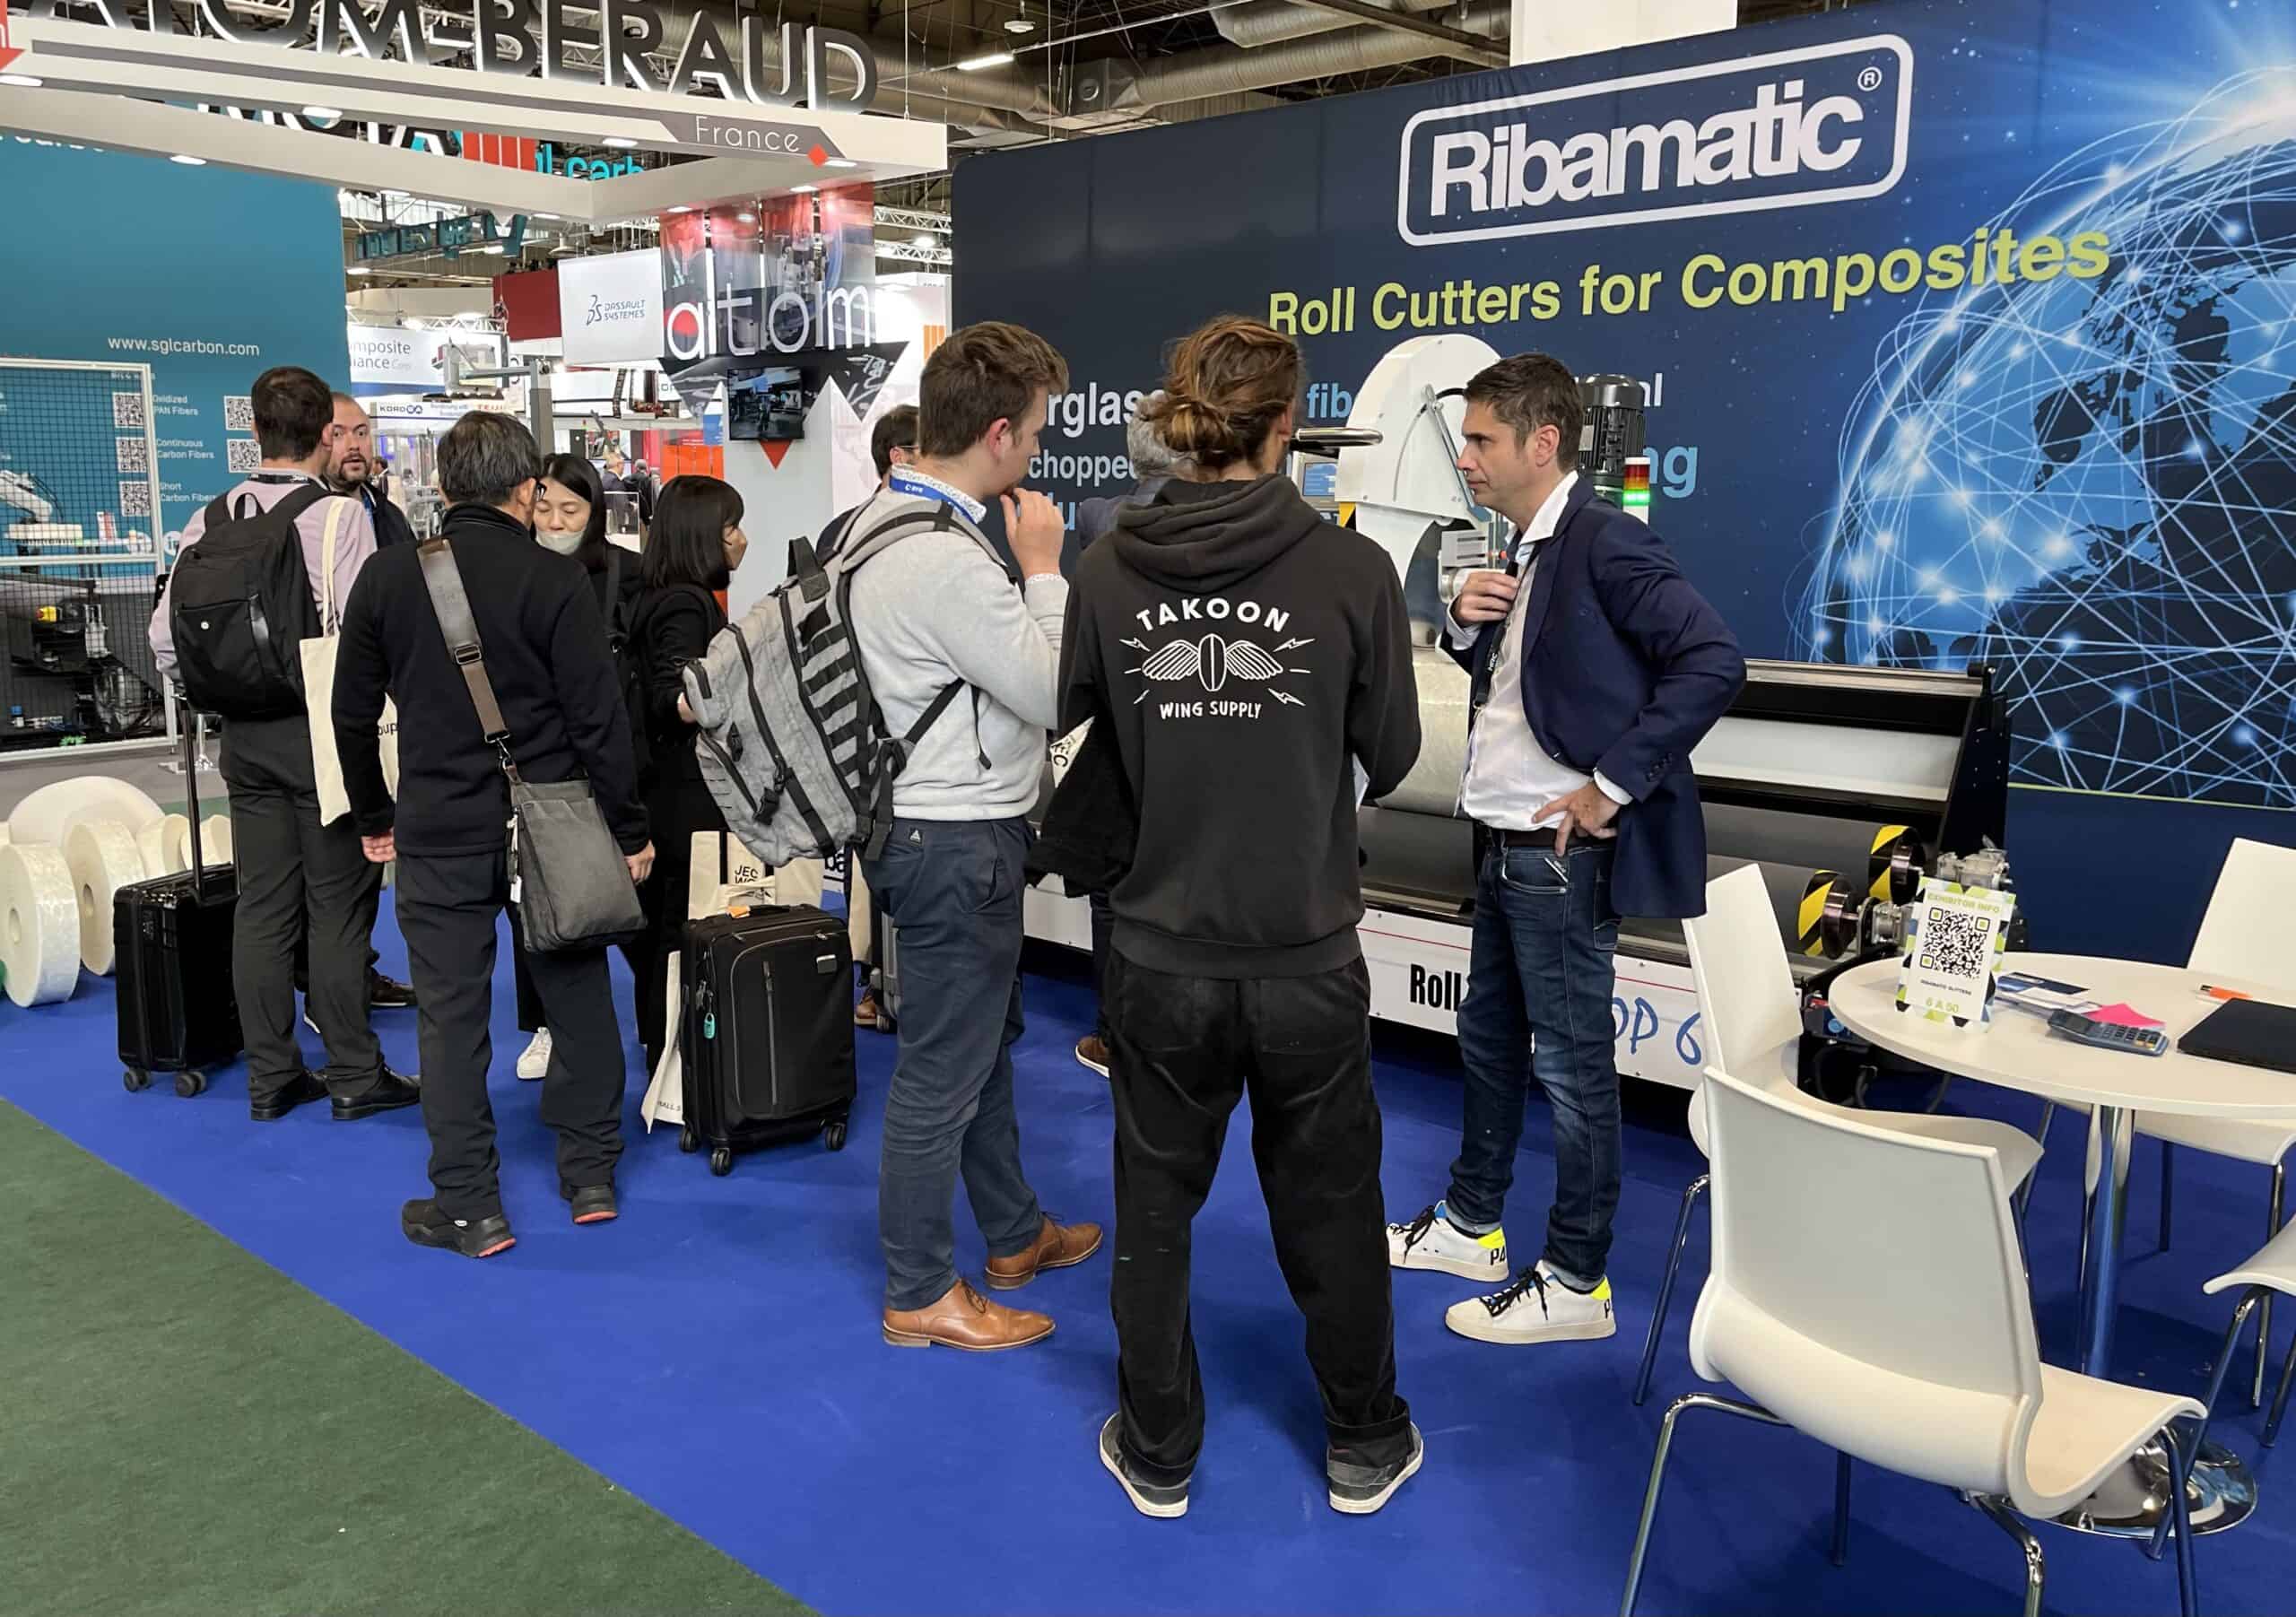 Ribamatic roll slitters for composites at JECWORLD